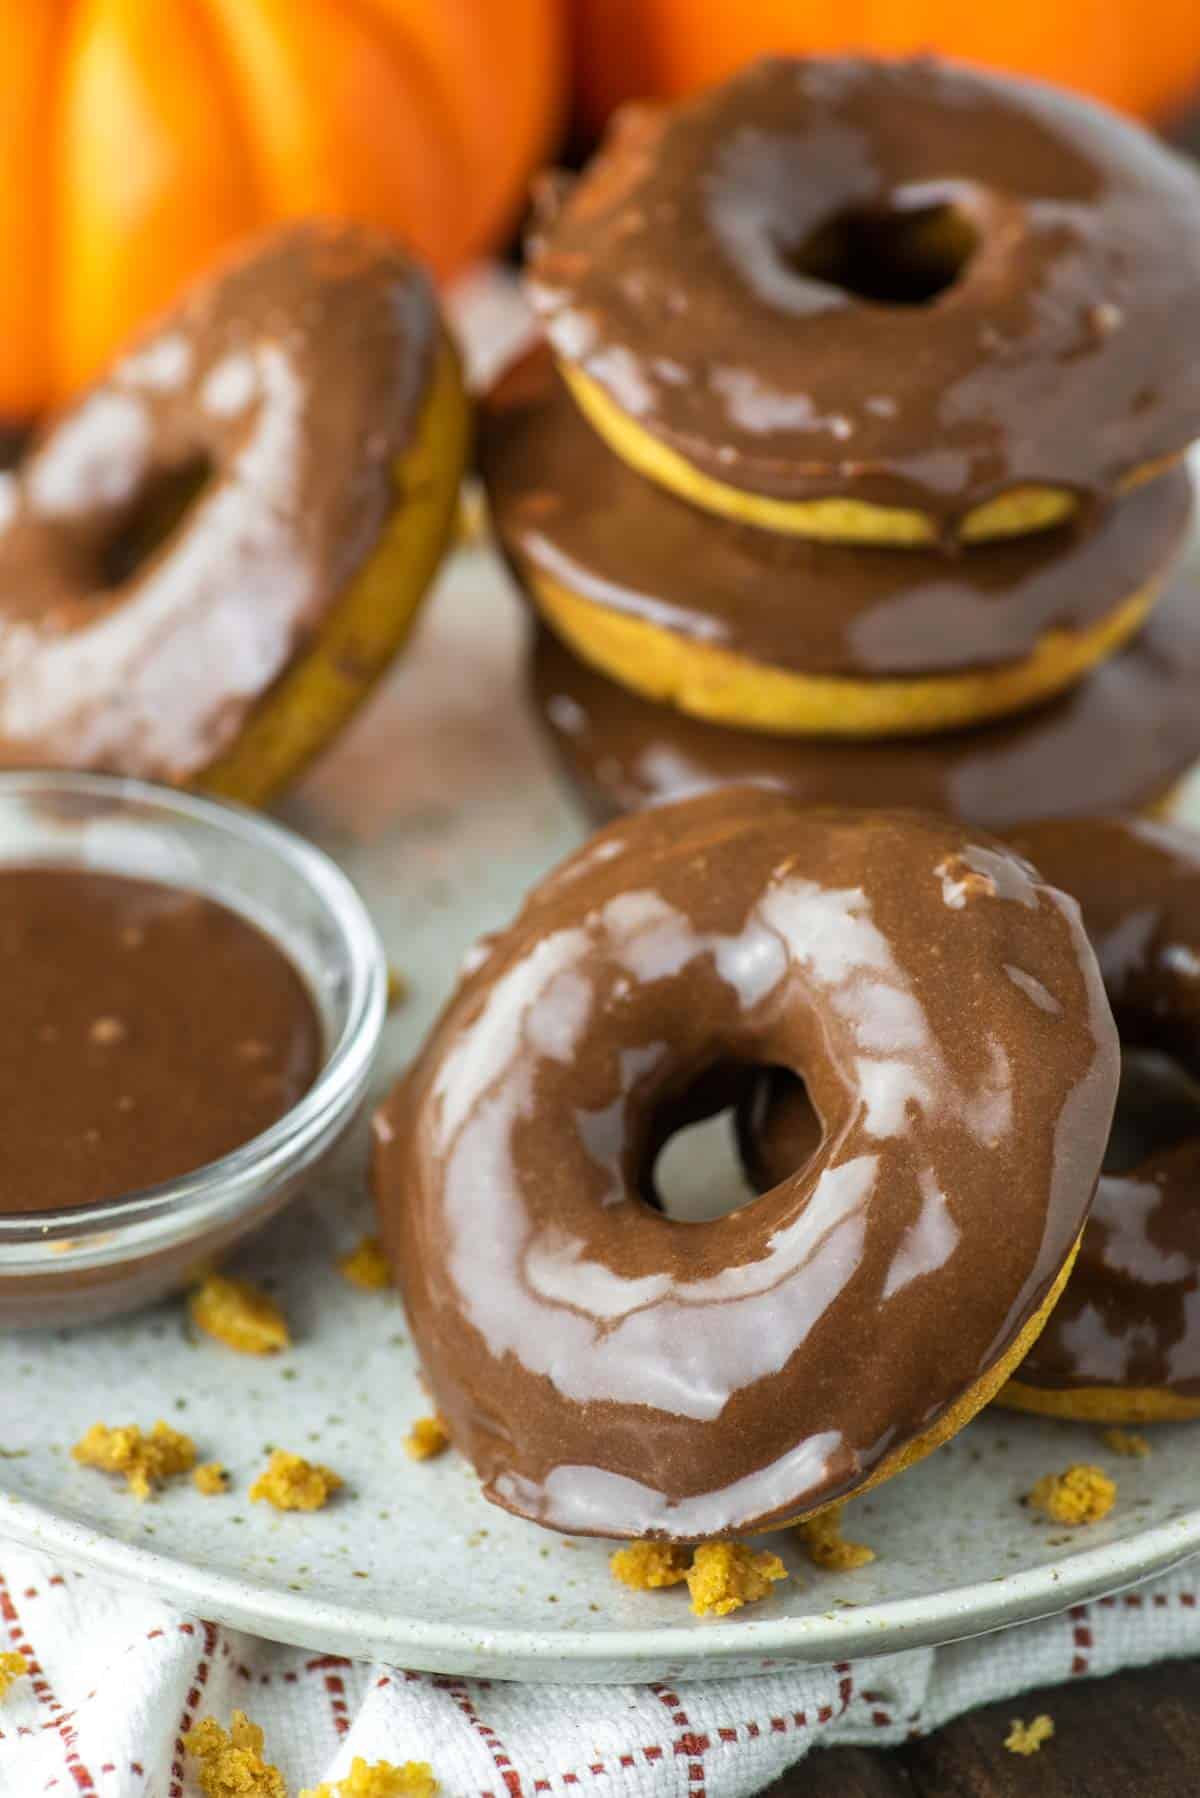 baked pumpkin donuts with chocolate glaze on plate with pumpkins in the background